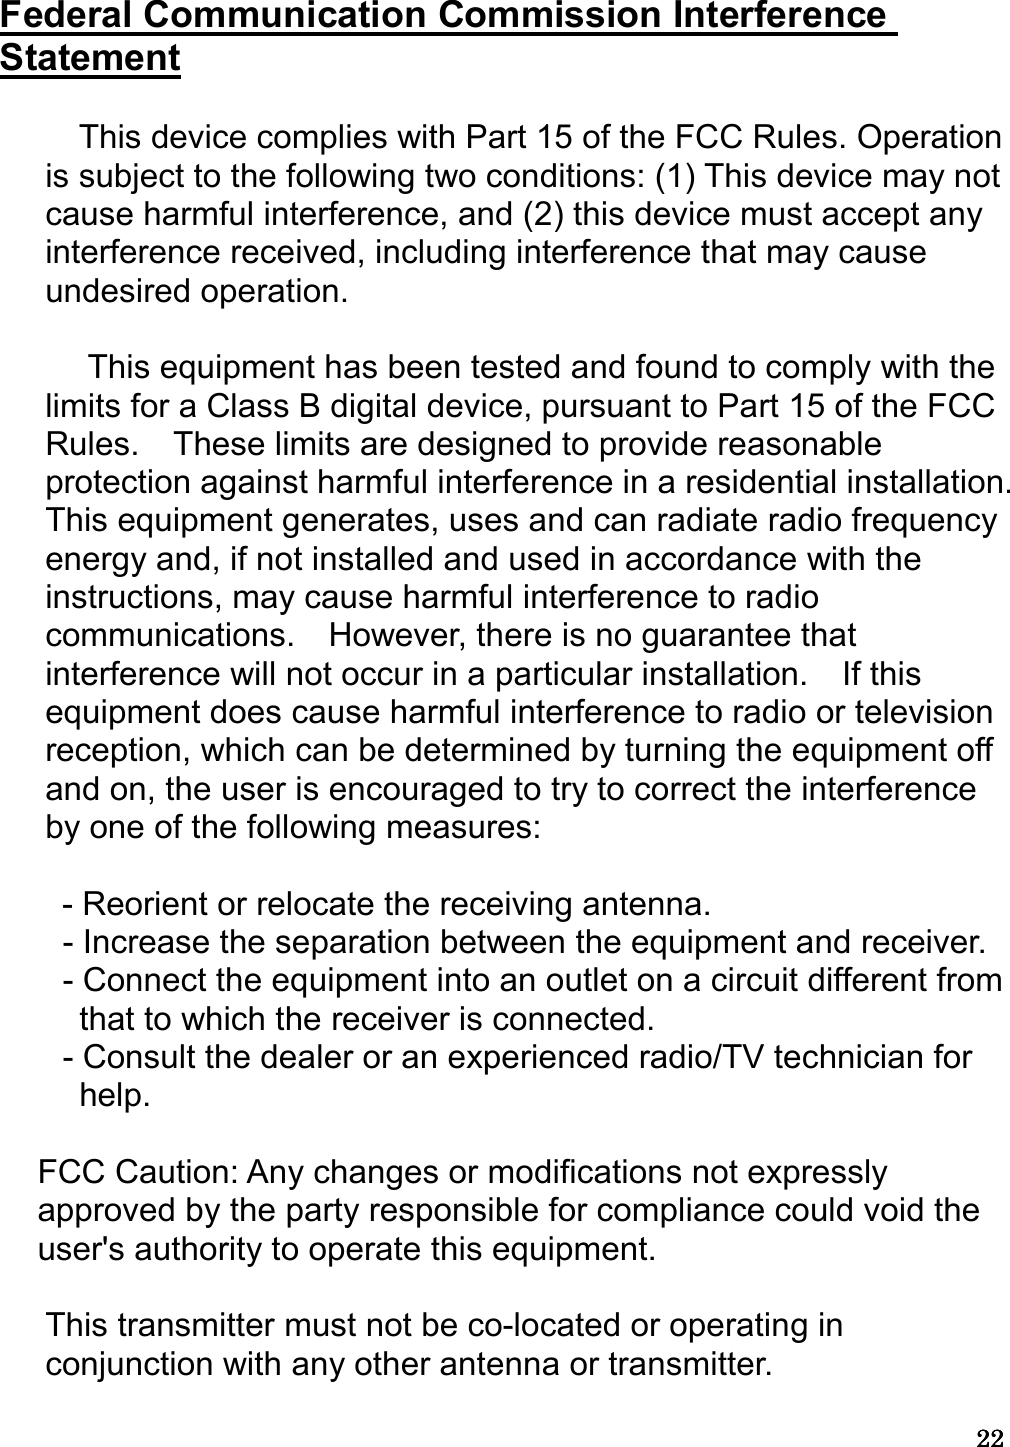 22222222   Federal Communication Commission Interference Statement    This device complies with Part 15 of the FCC Rules. Operation is subject to the following two conditions: (1) This device may not cause harmful interference, and (2) this device must accept any interference received, including interference that may cause undesired operation.      This equipment has been tested and found to comply with the limits for a Class B digital device, pursuant to Part 15 of the FCC Rules.    These limits are designed to provide reasonable protection against harmful interference in a residential installation. This equipment generates, uses and can radiate radio frequency energy and, if not installed and used in accordance with the instructions, may cause harmful interference to radio communications.    However, there is no guarantee that interference will not occur in a particular installation.    If this equipment does cause harmful interference to radio or television reception, which can be determined by turning the equipment off and on, the user is encouraged to try to correct the interference by one of the following measures:    - Reorient or relocate the receiving antenna. - Increase the separation between the equipment and receiver. - Connect the equipment into an outlet on a circuit different from that to which the receiver is connected. - Consult the dealer or an experienced radio/TV technician for help.    FCC Caution: Any changes or modifications not expressly approved by the party responsible for compliance could void the user&apos;s authority to operate this equipment.    This transmitter must not be co-located or operating in conjunction with any other antenna or transmitter.  